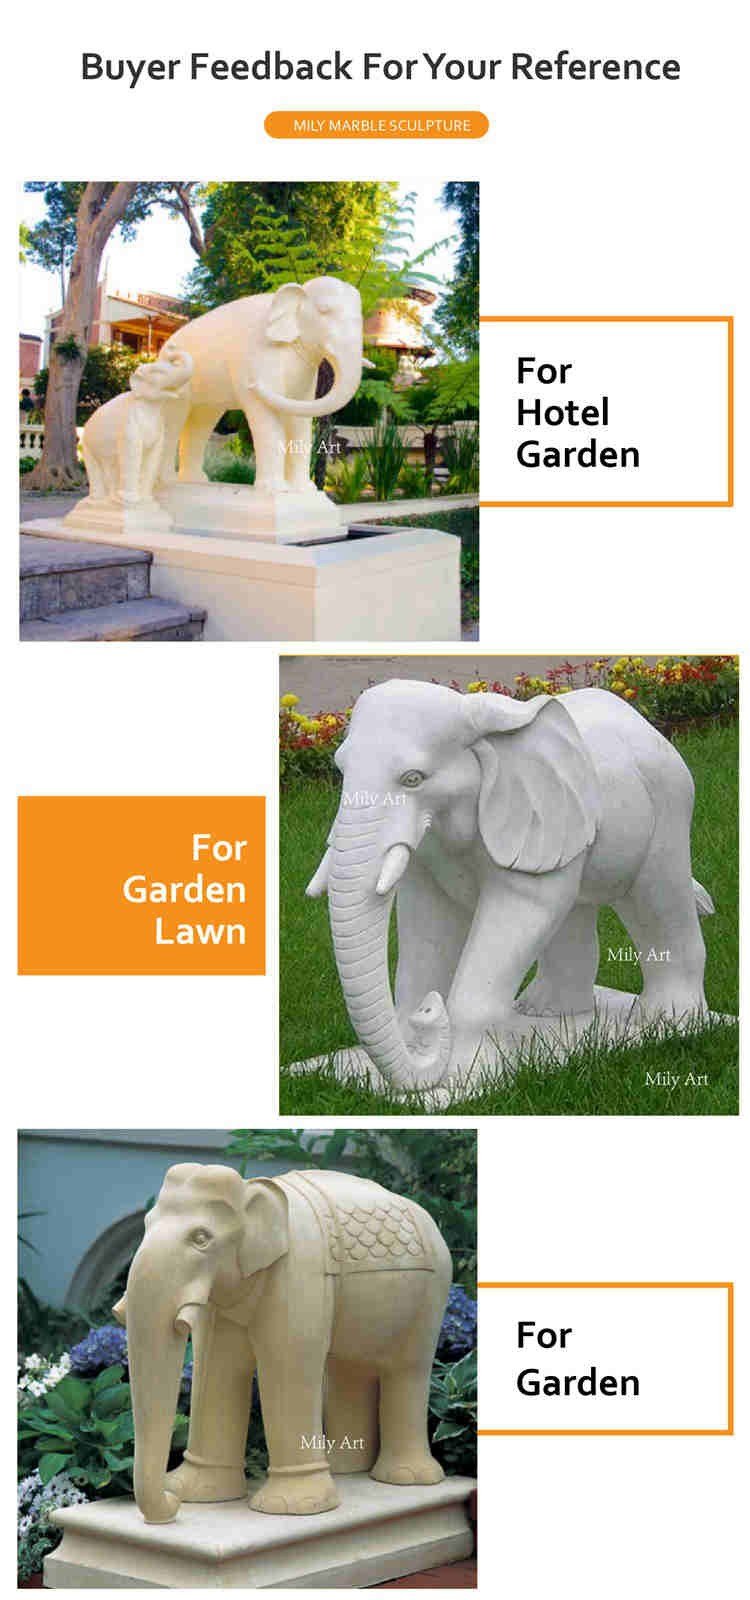 4.1.feedback of large marble elephant statue mily sculpture